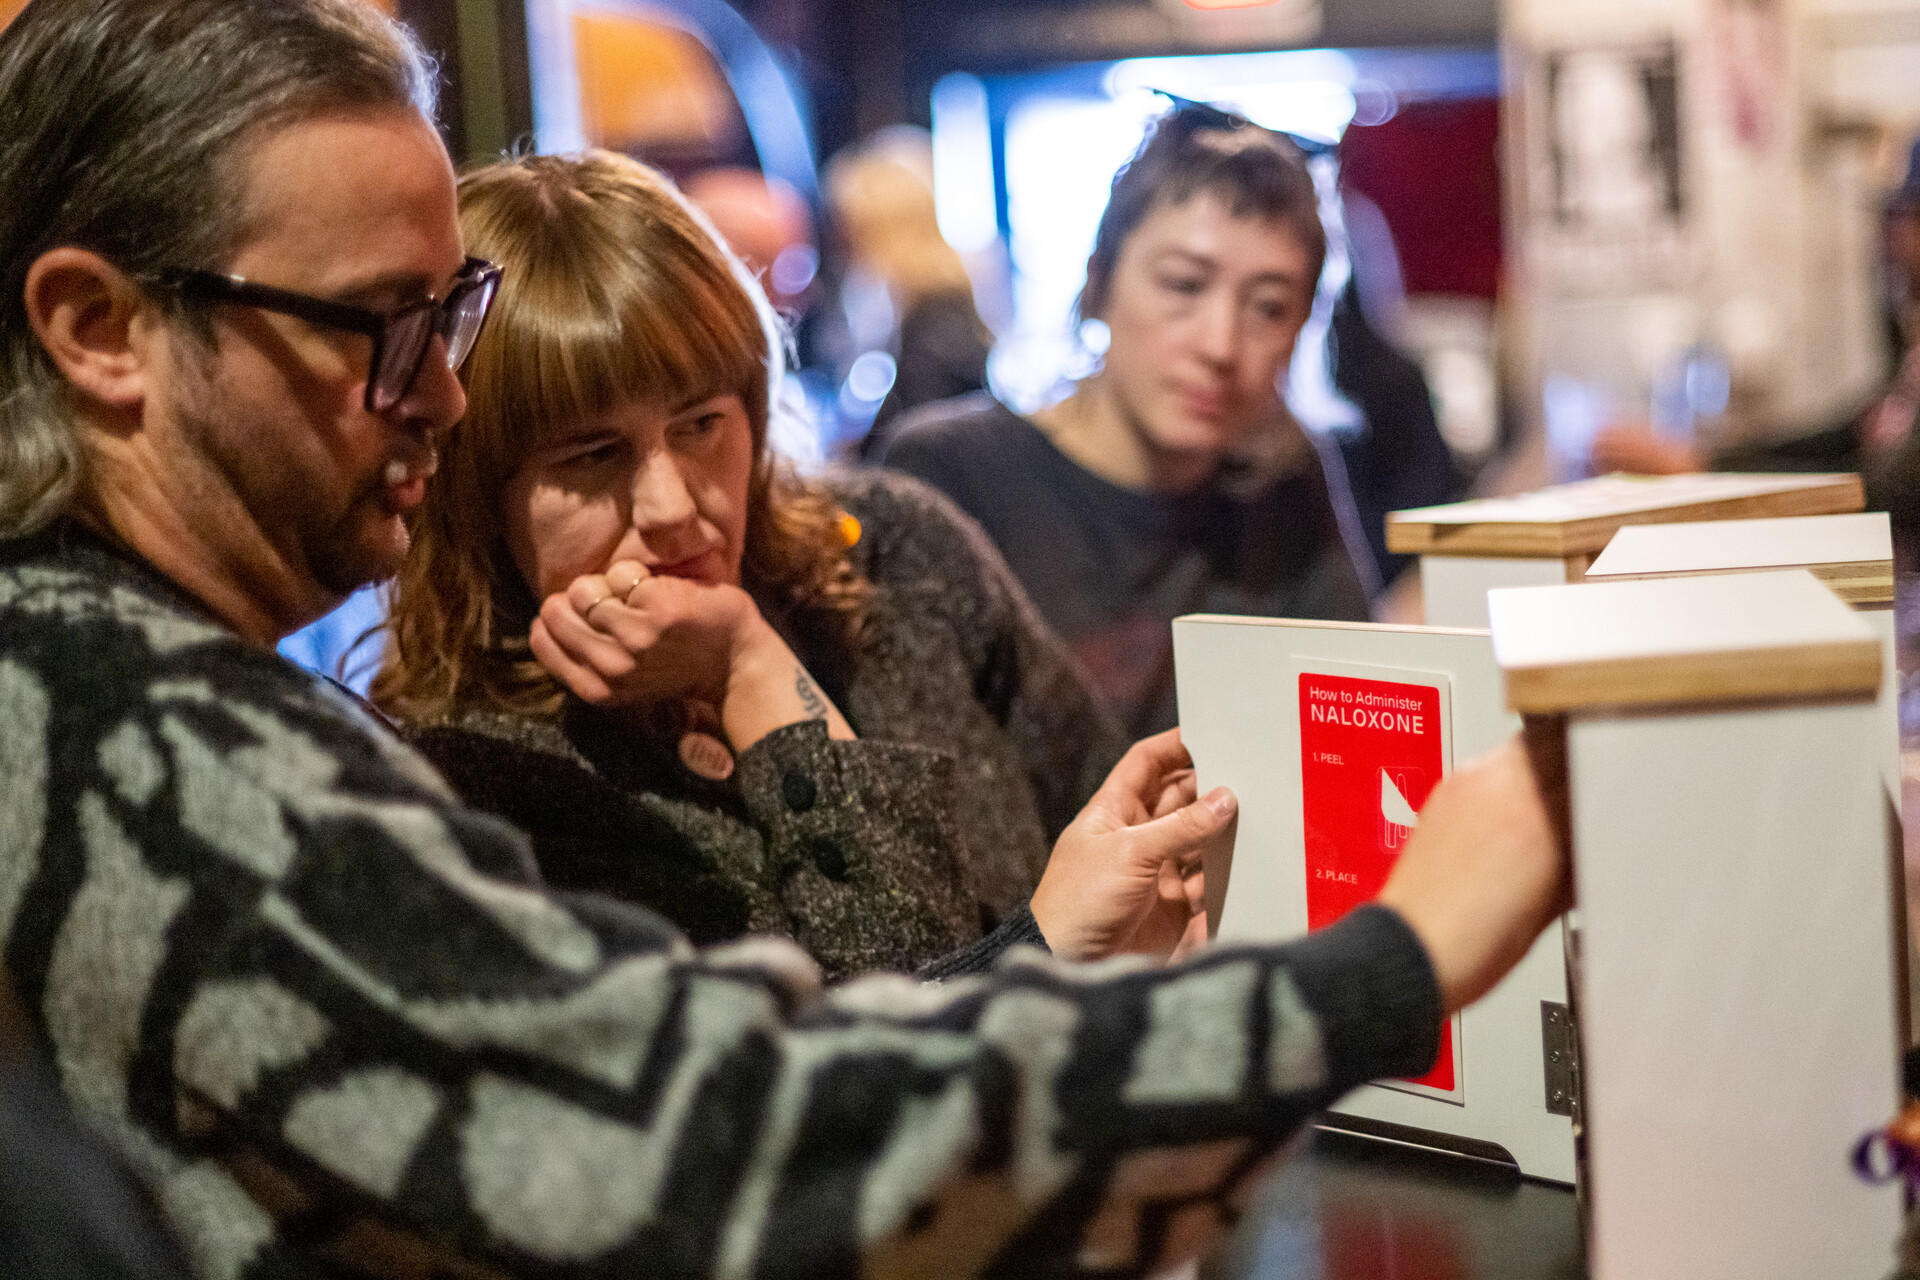 A white man with glasses and a sweater opens a white wooden box with "How to Administer Naloxone" written in red on the inside of the box lid, as two women look on from the man's left.